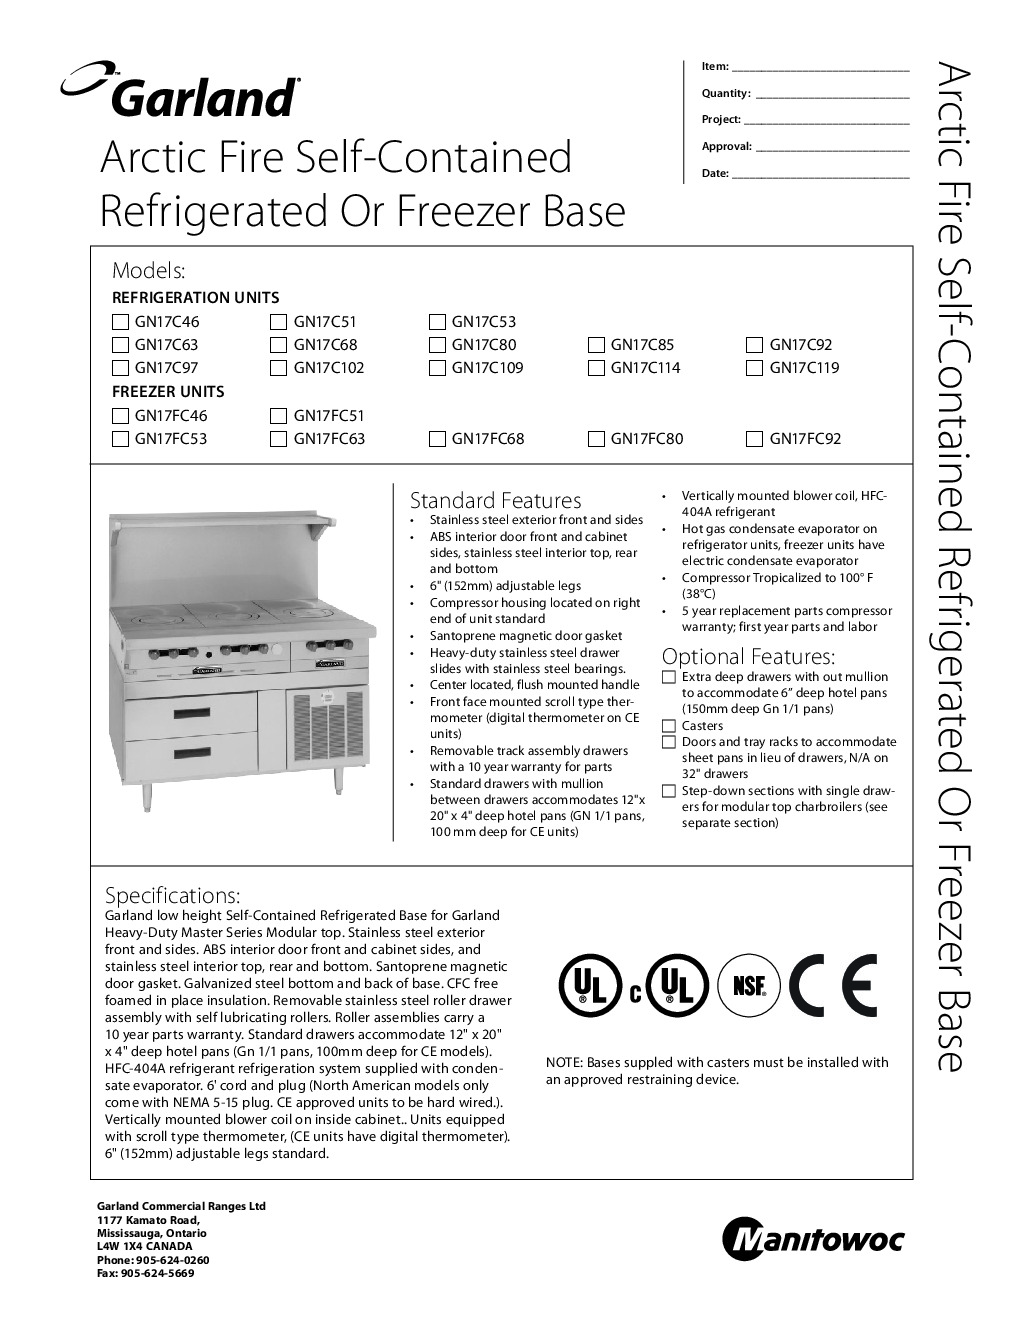 Garland US Range GN17C109 Refrigerated Base Equipment Stand